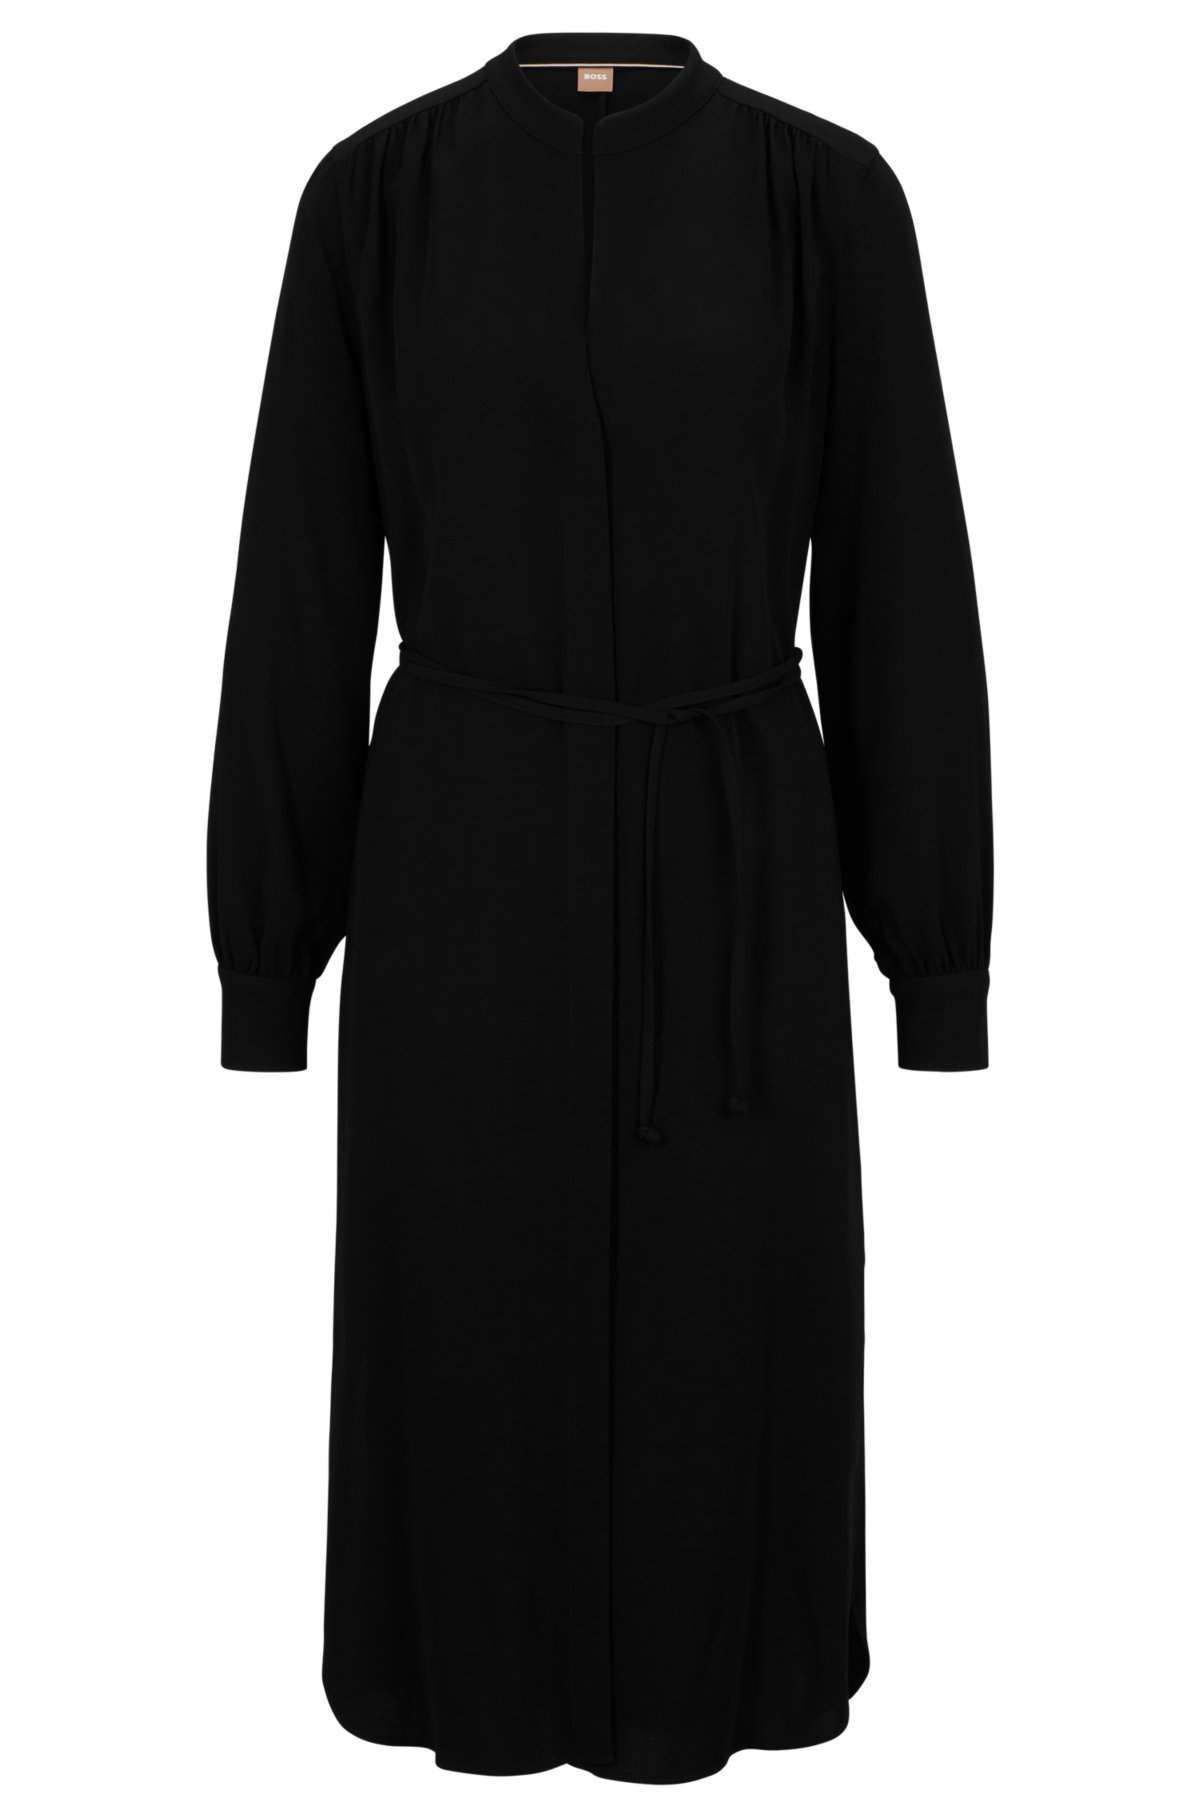 BOSS - Belted shirt dress with collarless styling and button cuffs